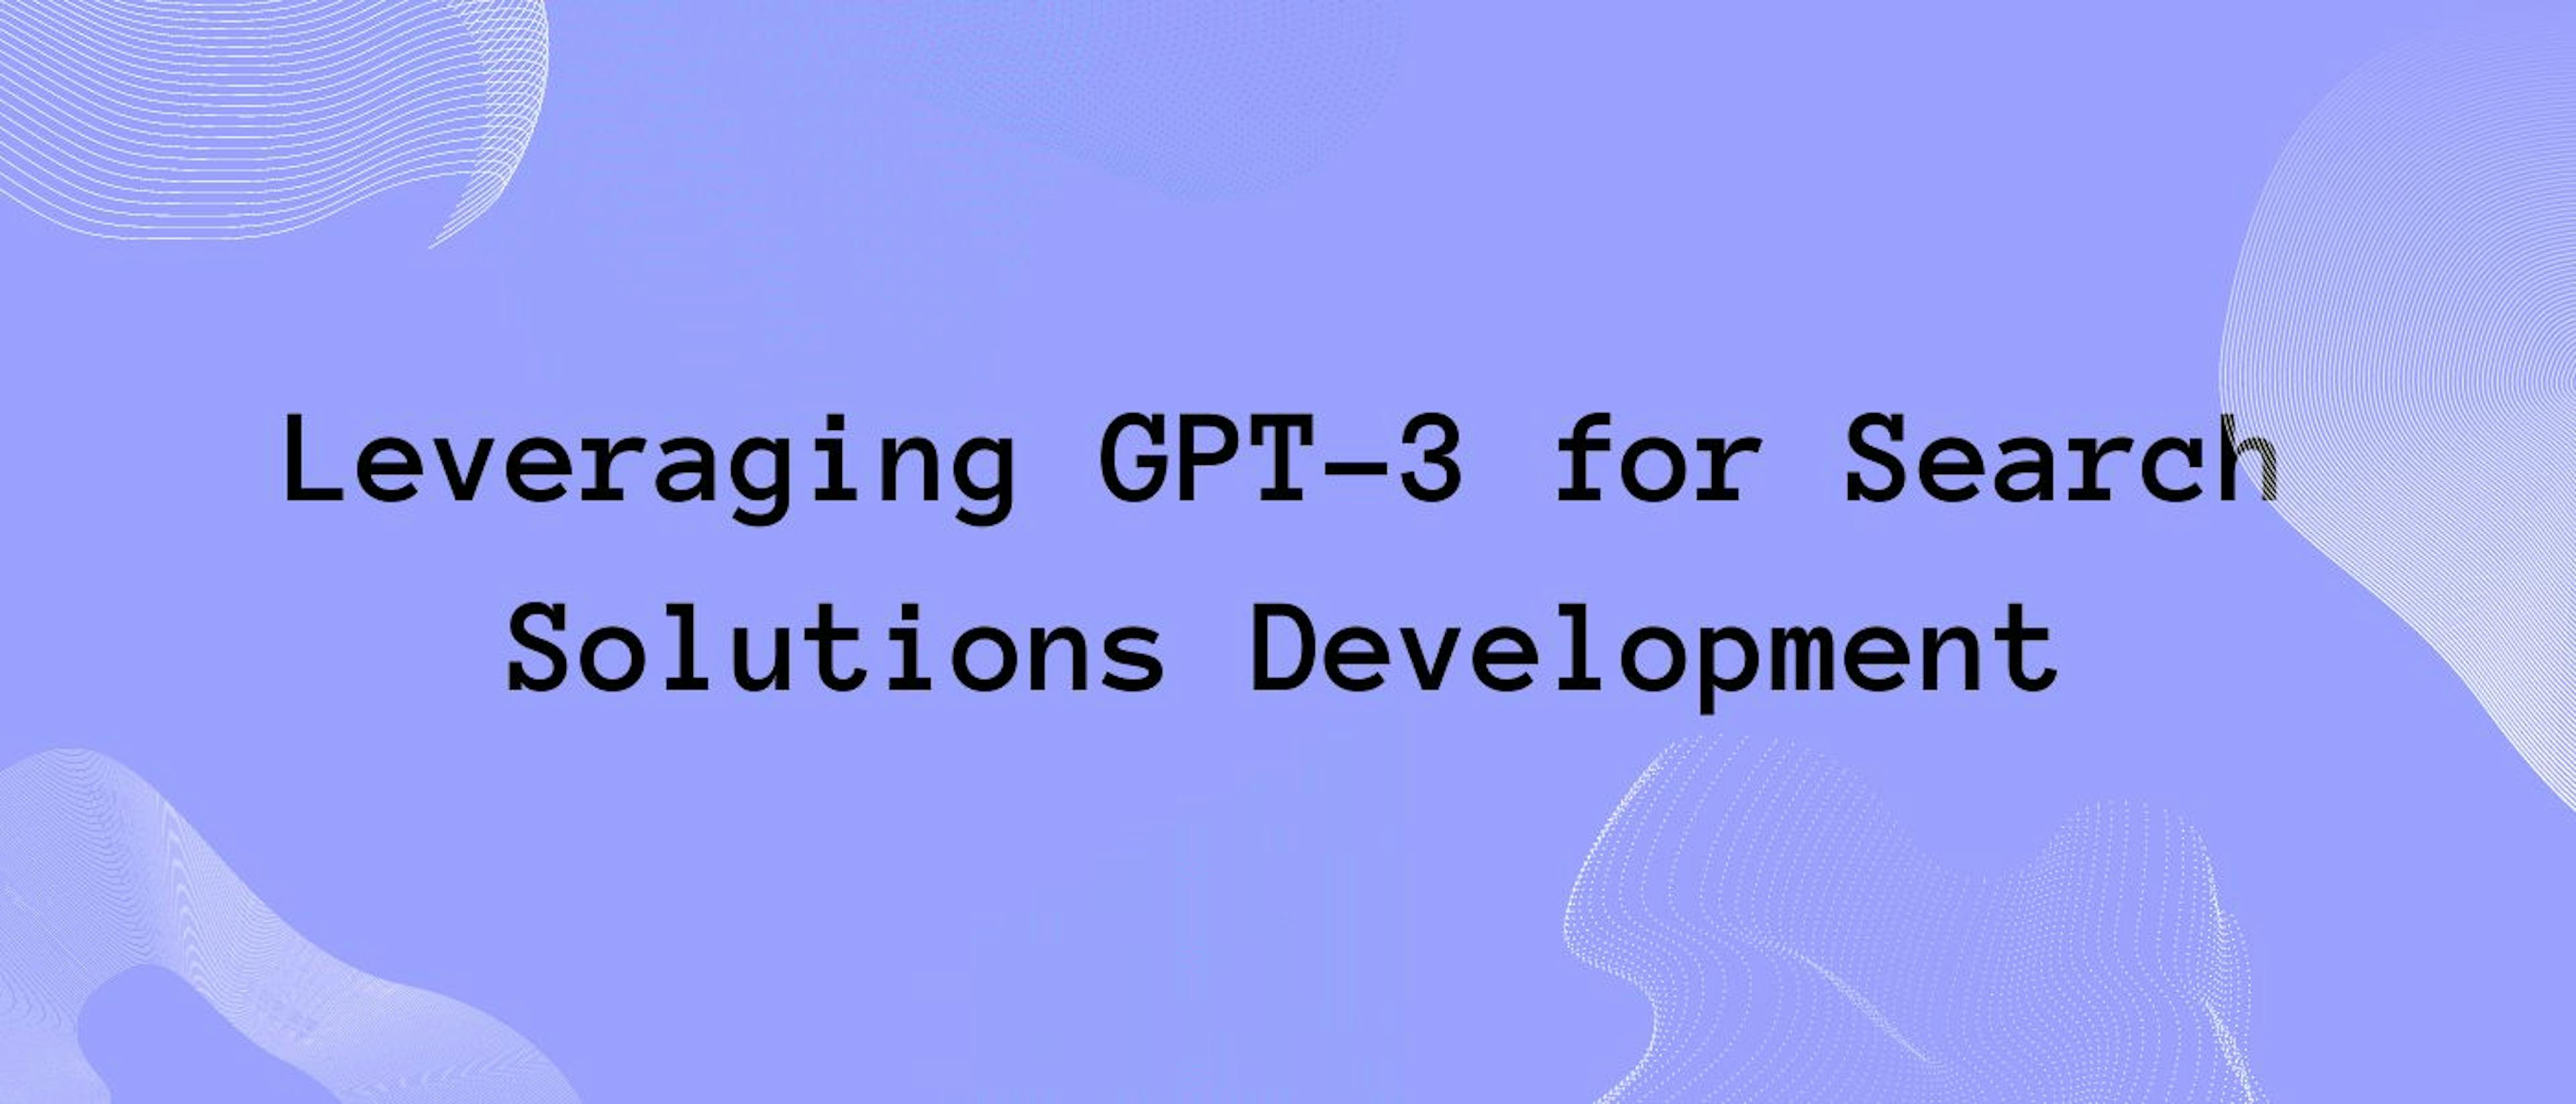 featured image - Harnessing GPT-3 for Improved Search Solutions